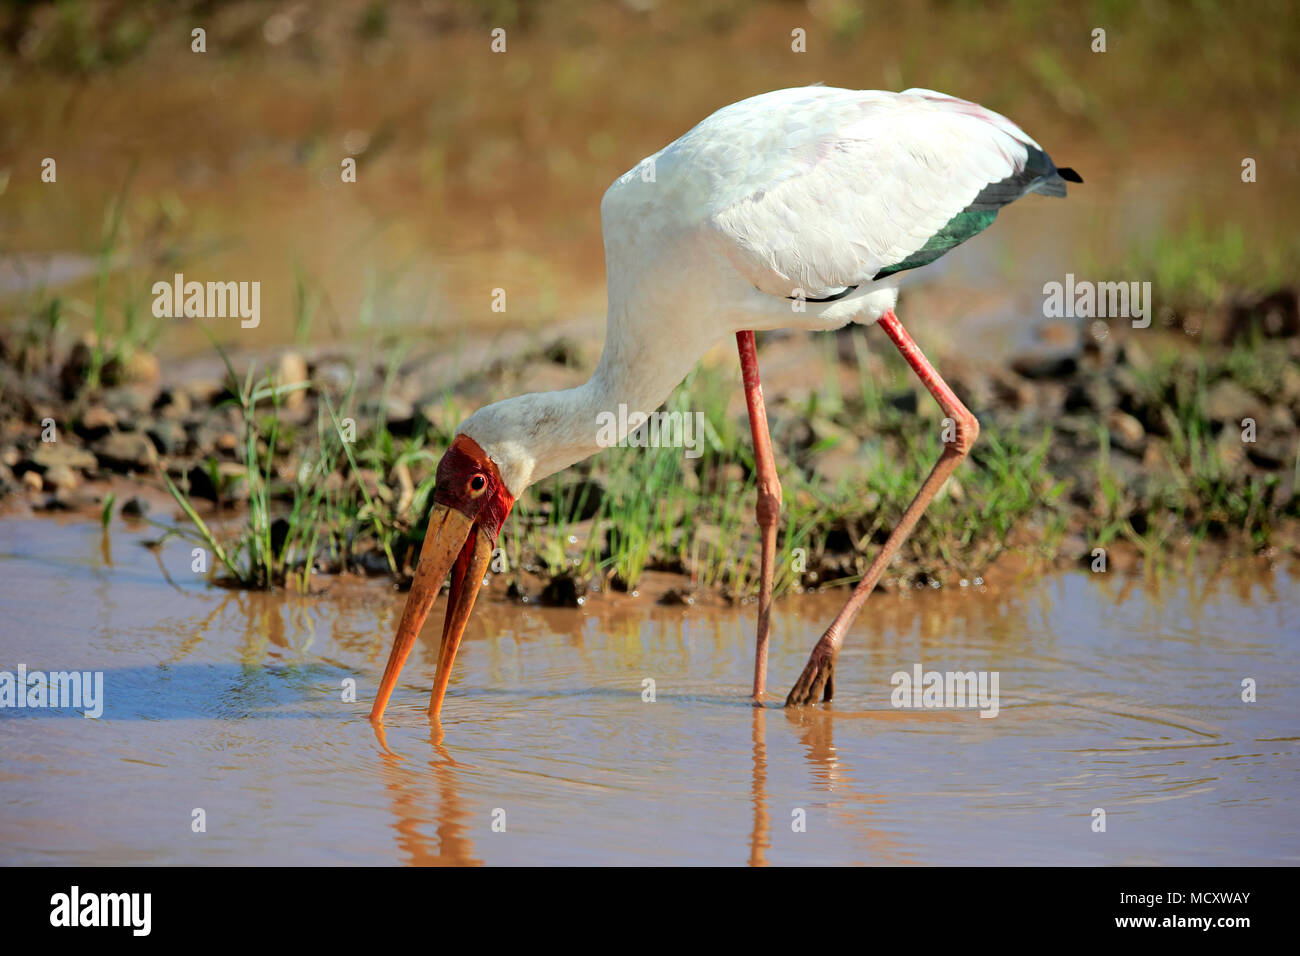 Yellow-billed stork (Mycteria ibis), adult, on the water foraging, Kruger National Park, South Africa Stock Photo